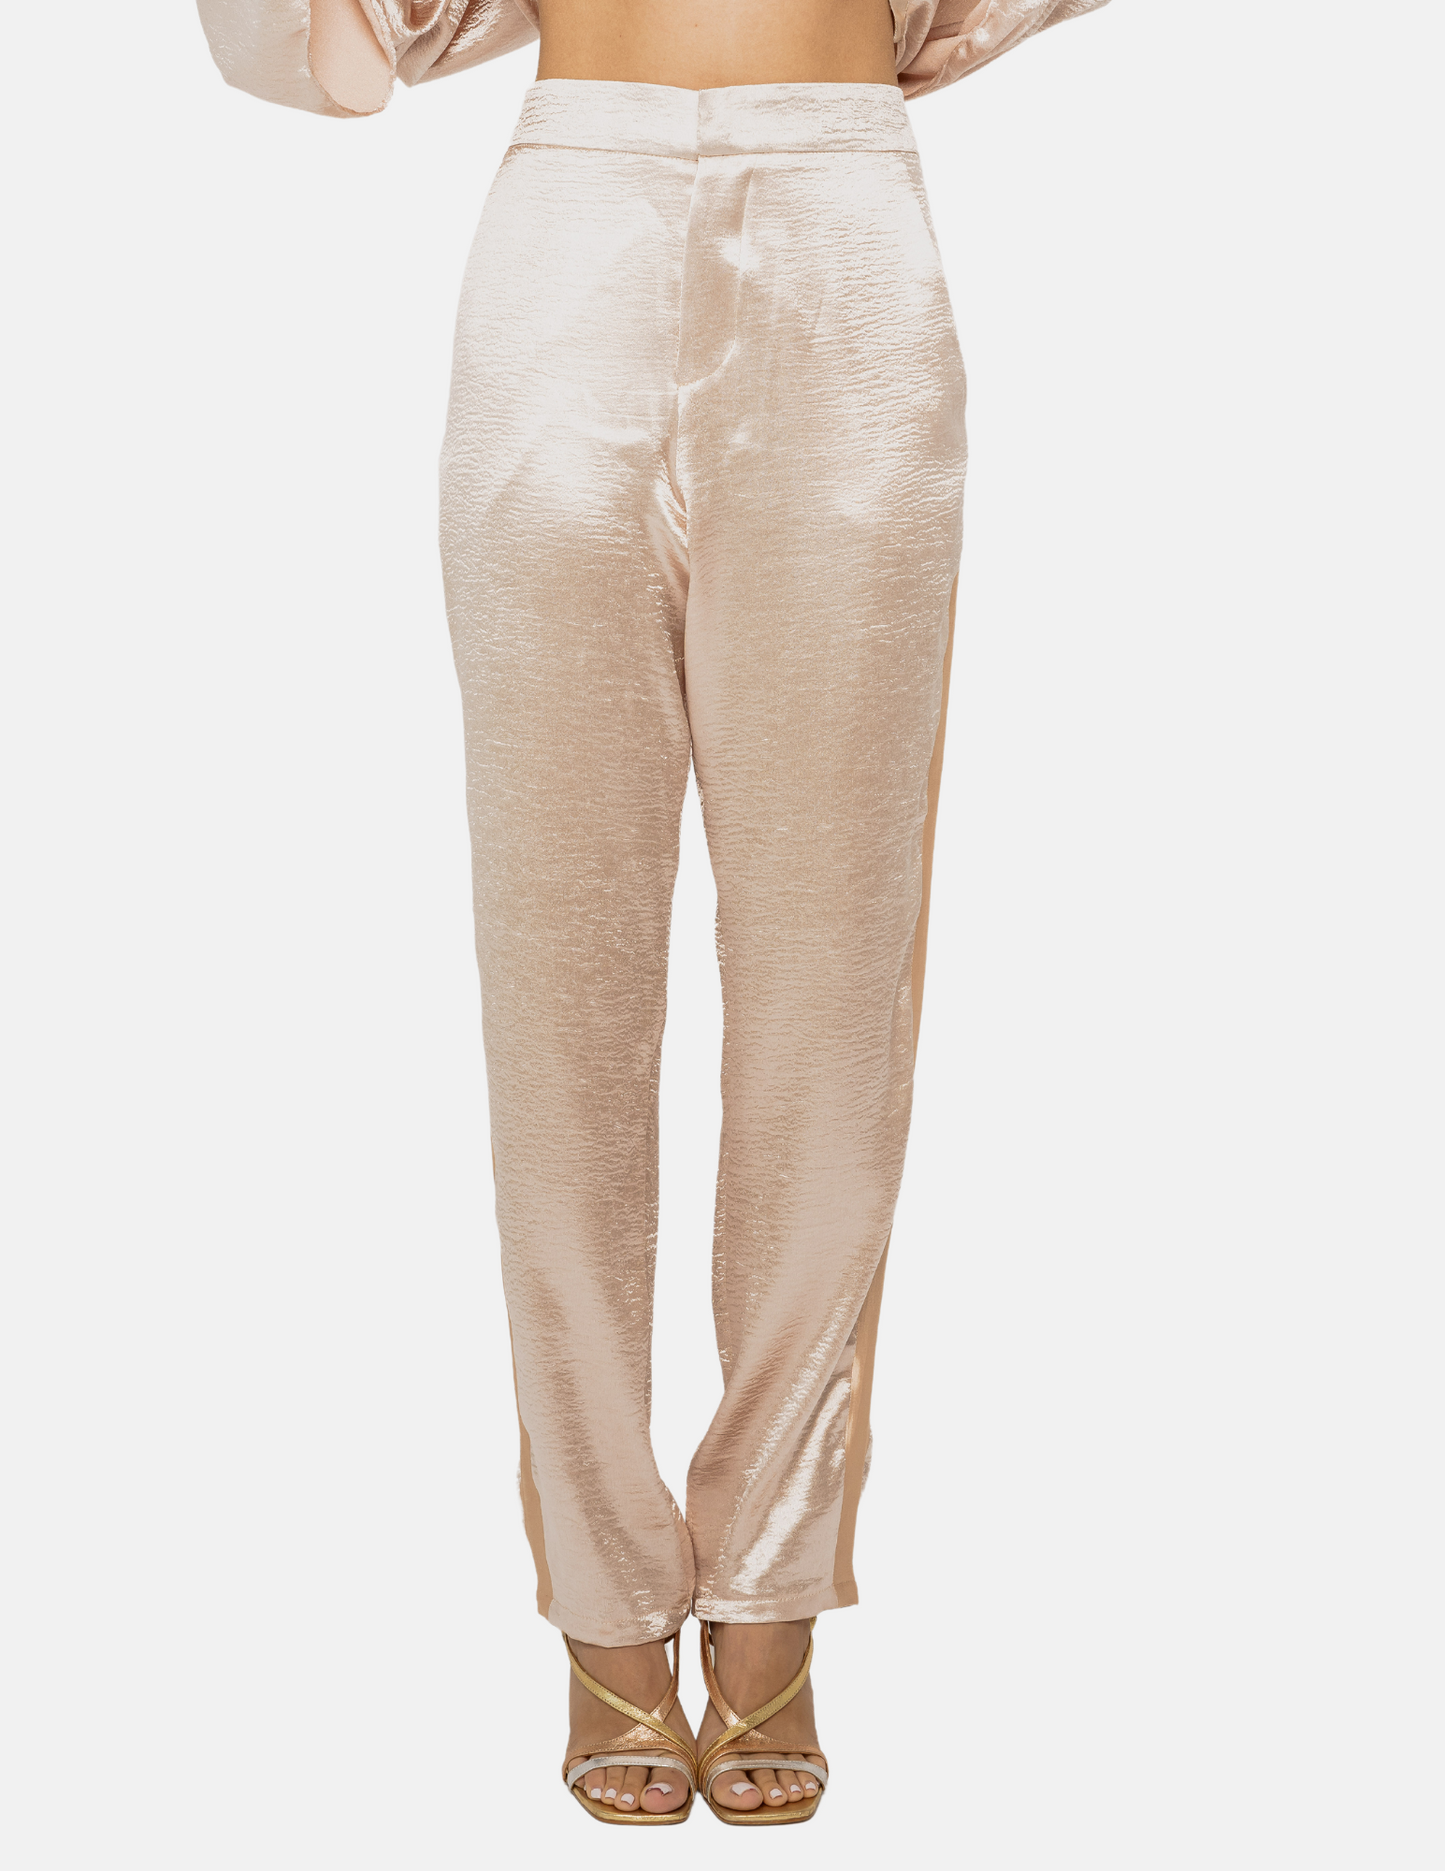 Champagne Liatris mid-rise pants made of satin.